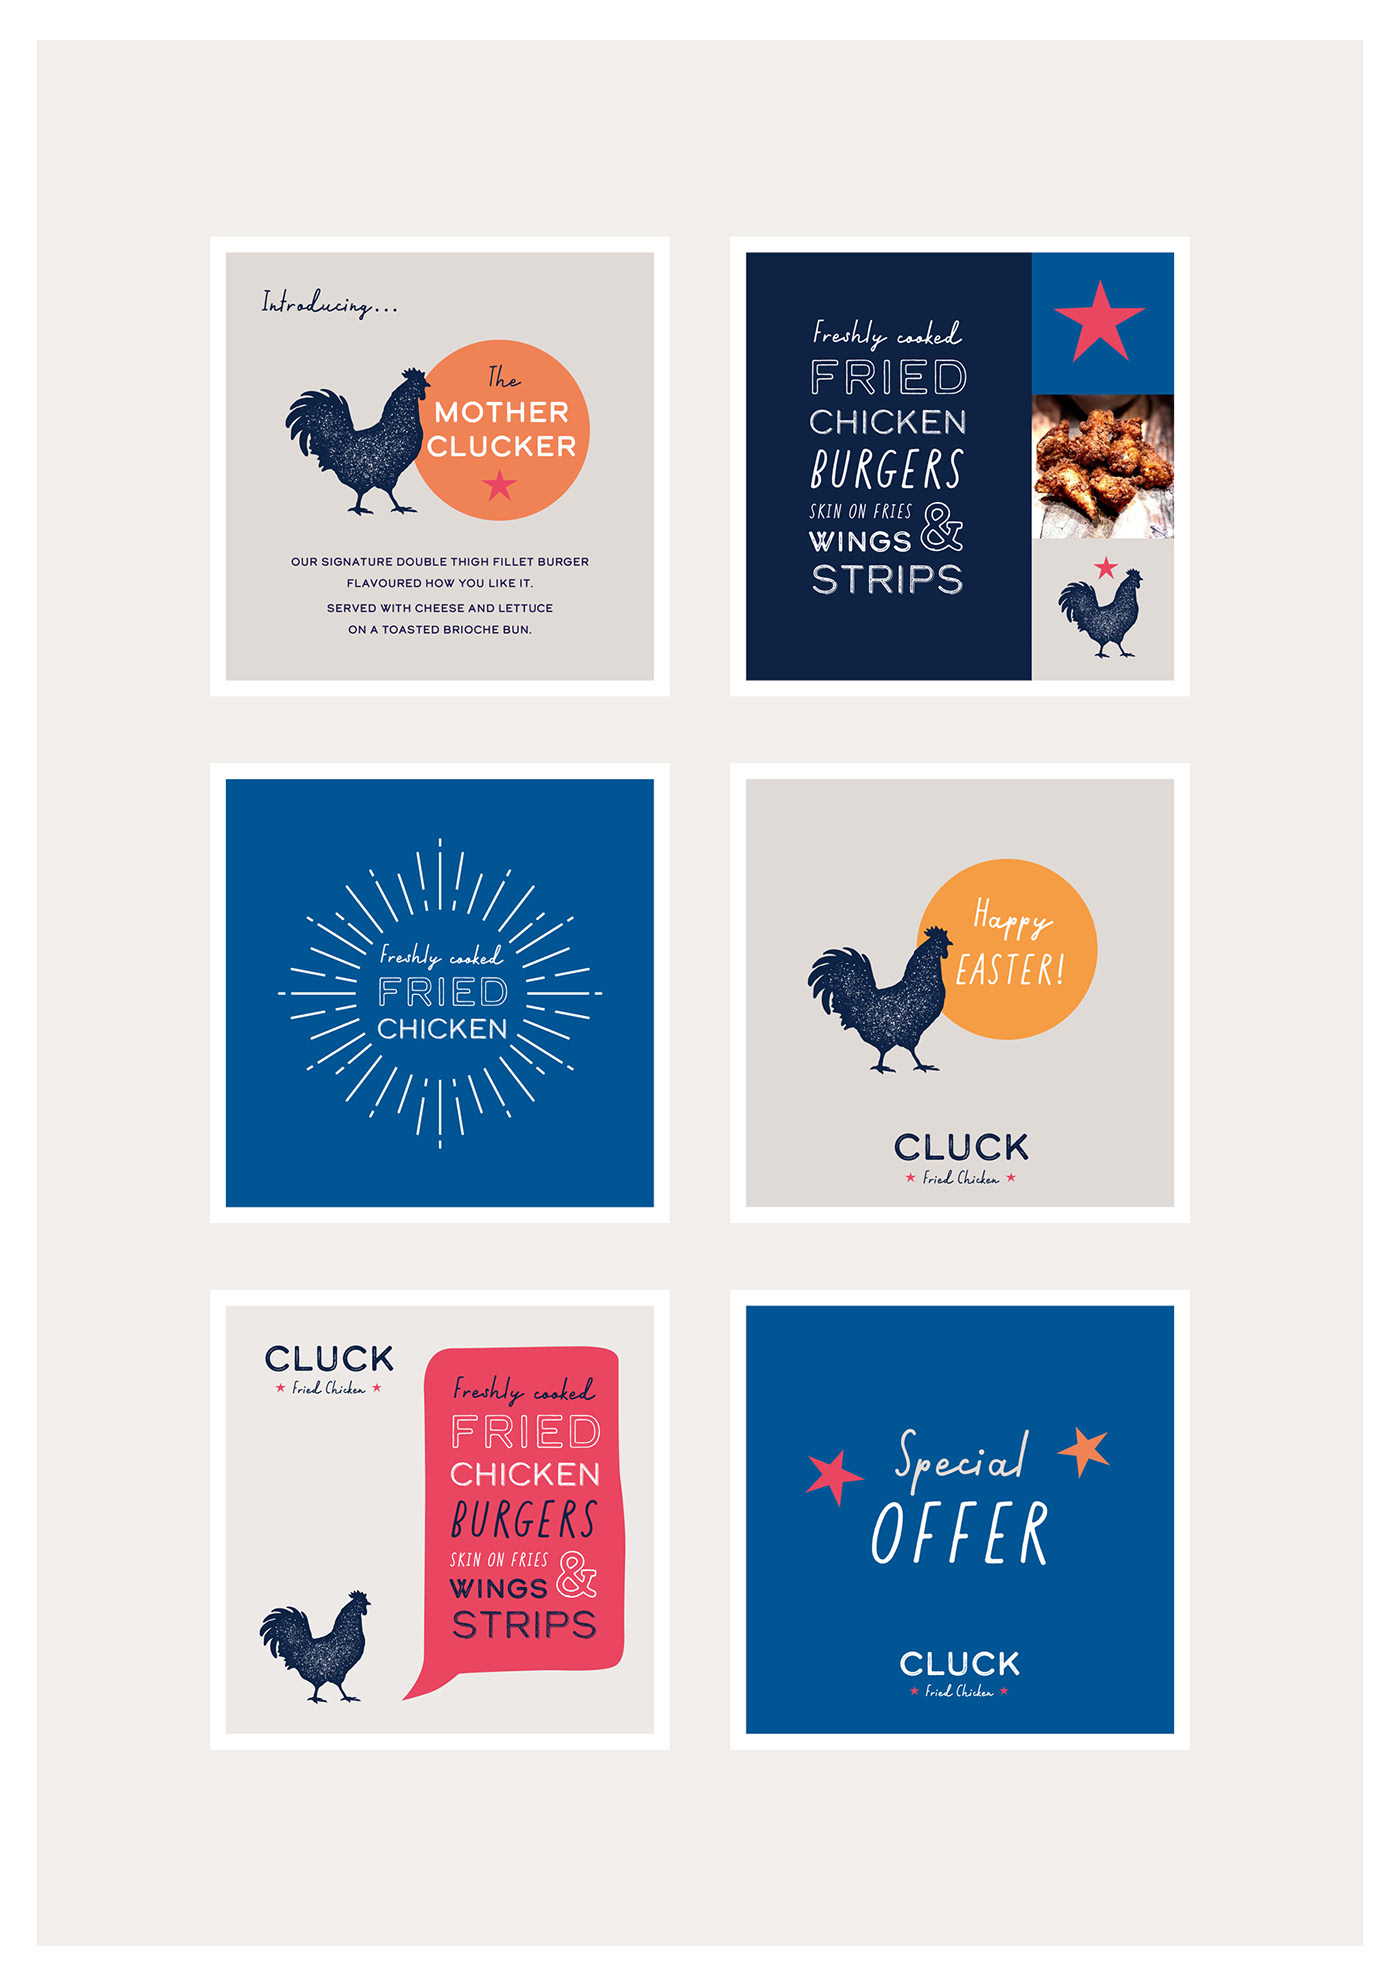 Social media image designs for Cluck Fried Chicken